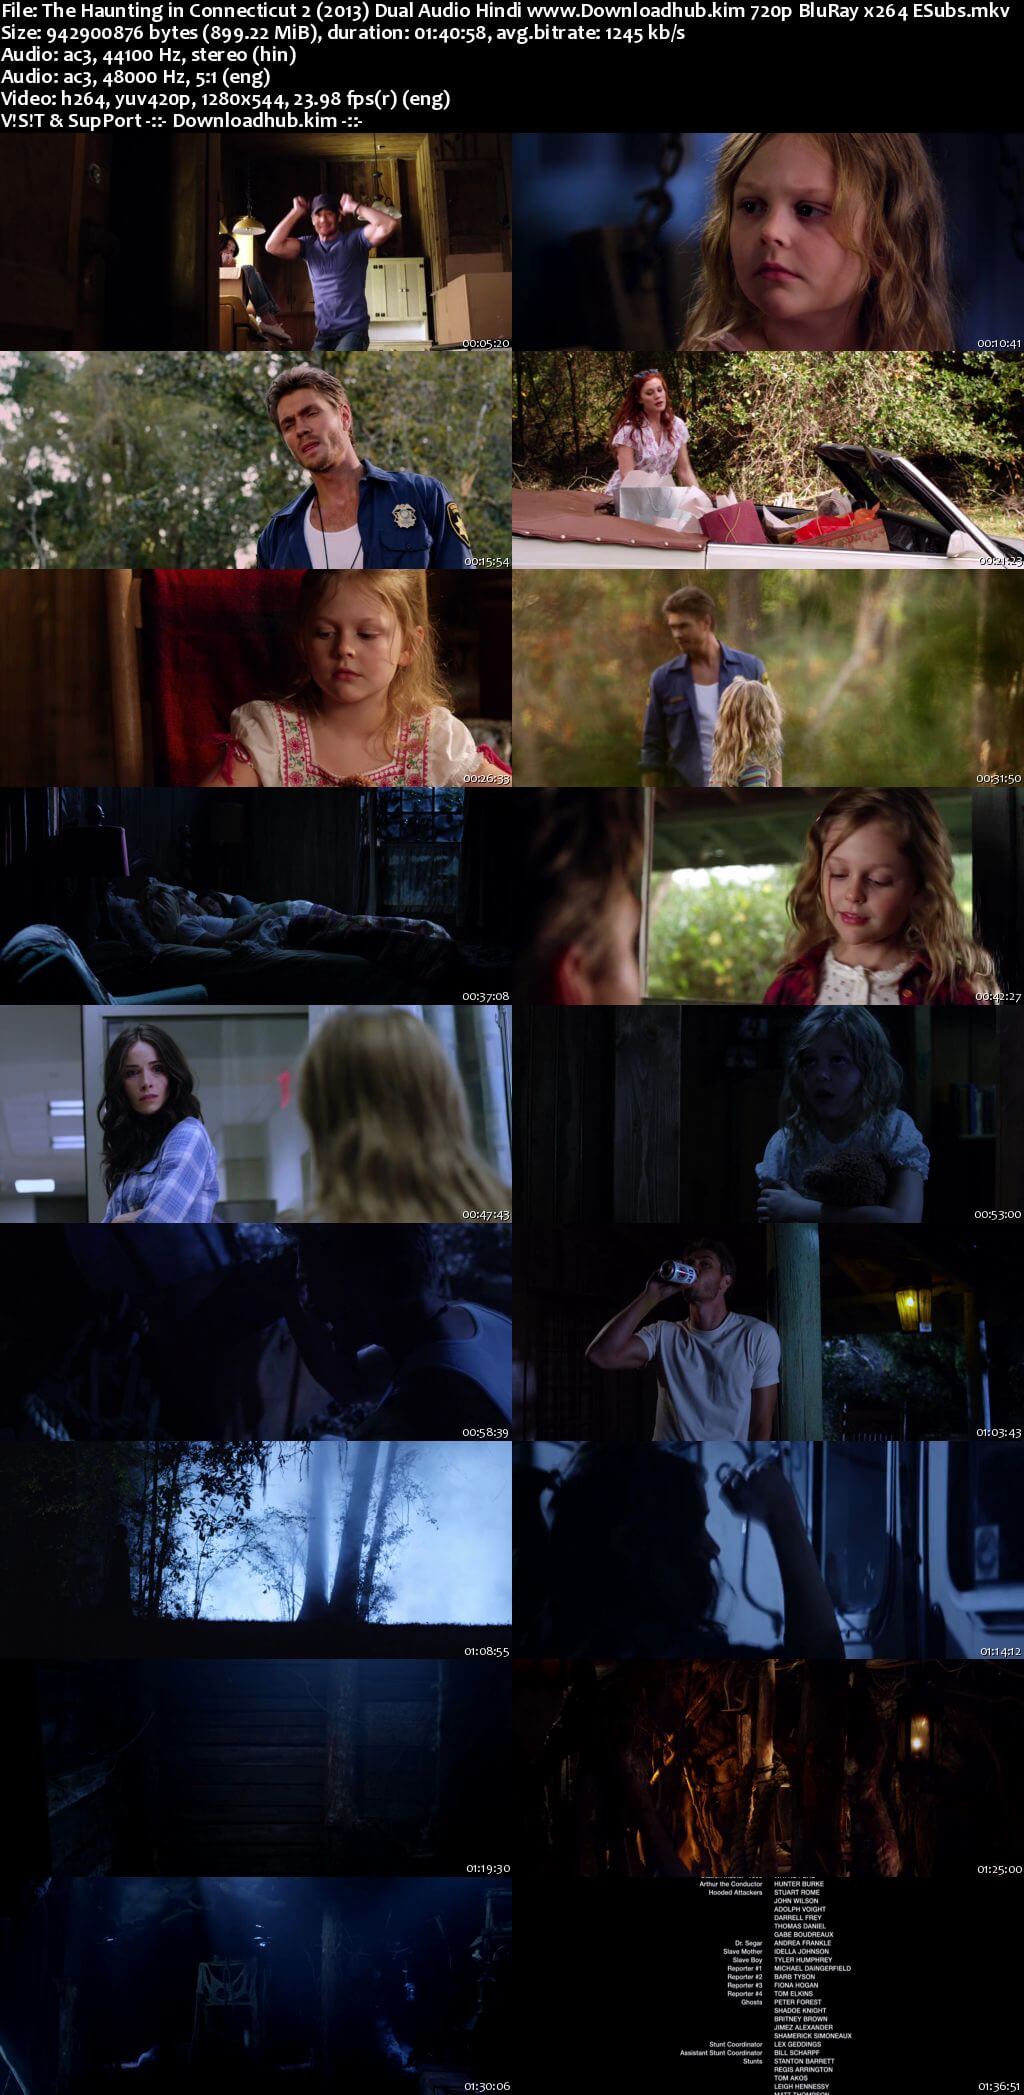 The Haunting in Connecticut 2 2013 Hindi Dual Audio 720p BluRay ESubs